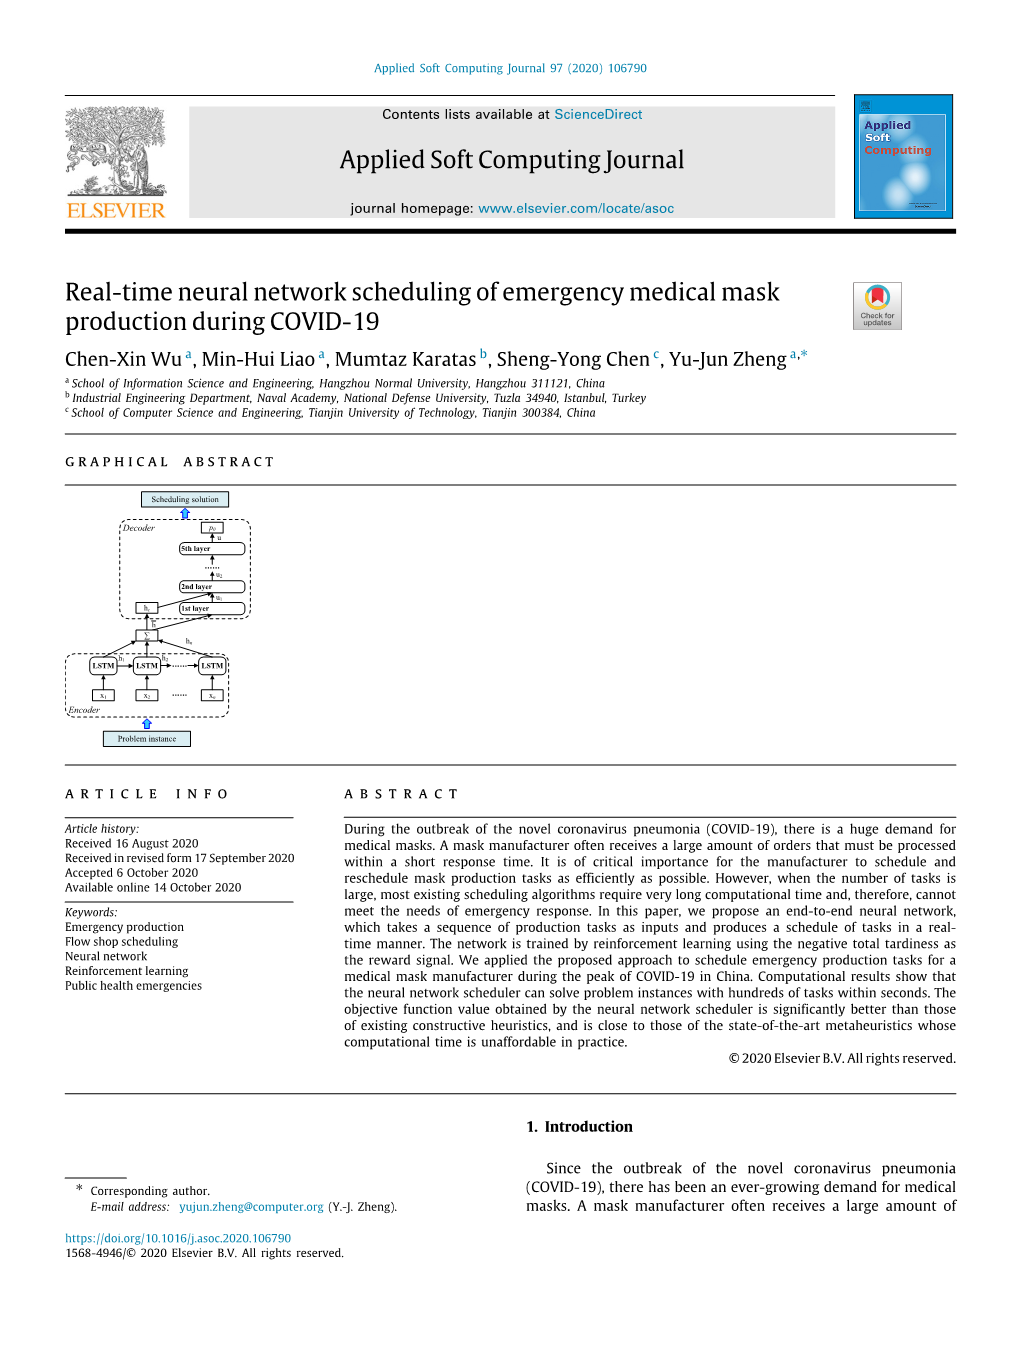 Applied Soft Computing Journal Real-Time Neural Network Scheduling of Emergency Medical Mask Production During COVID-19